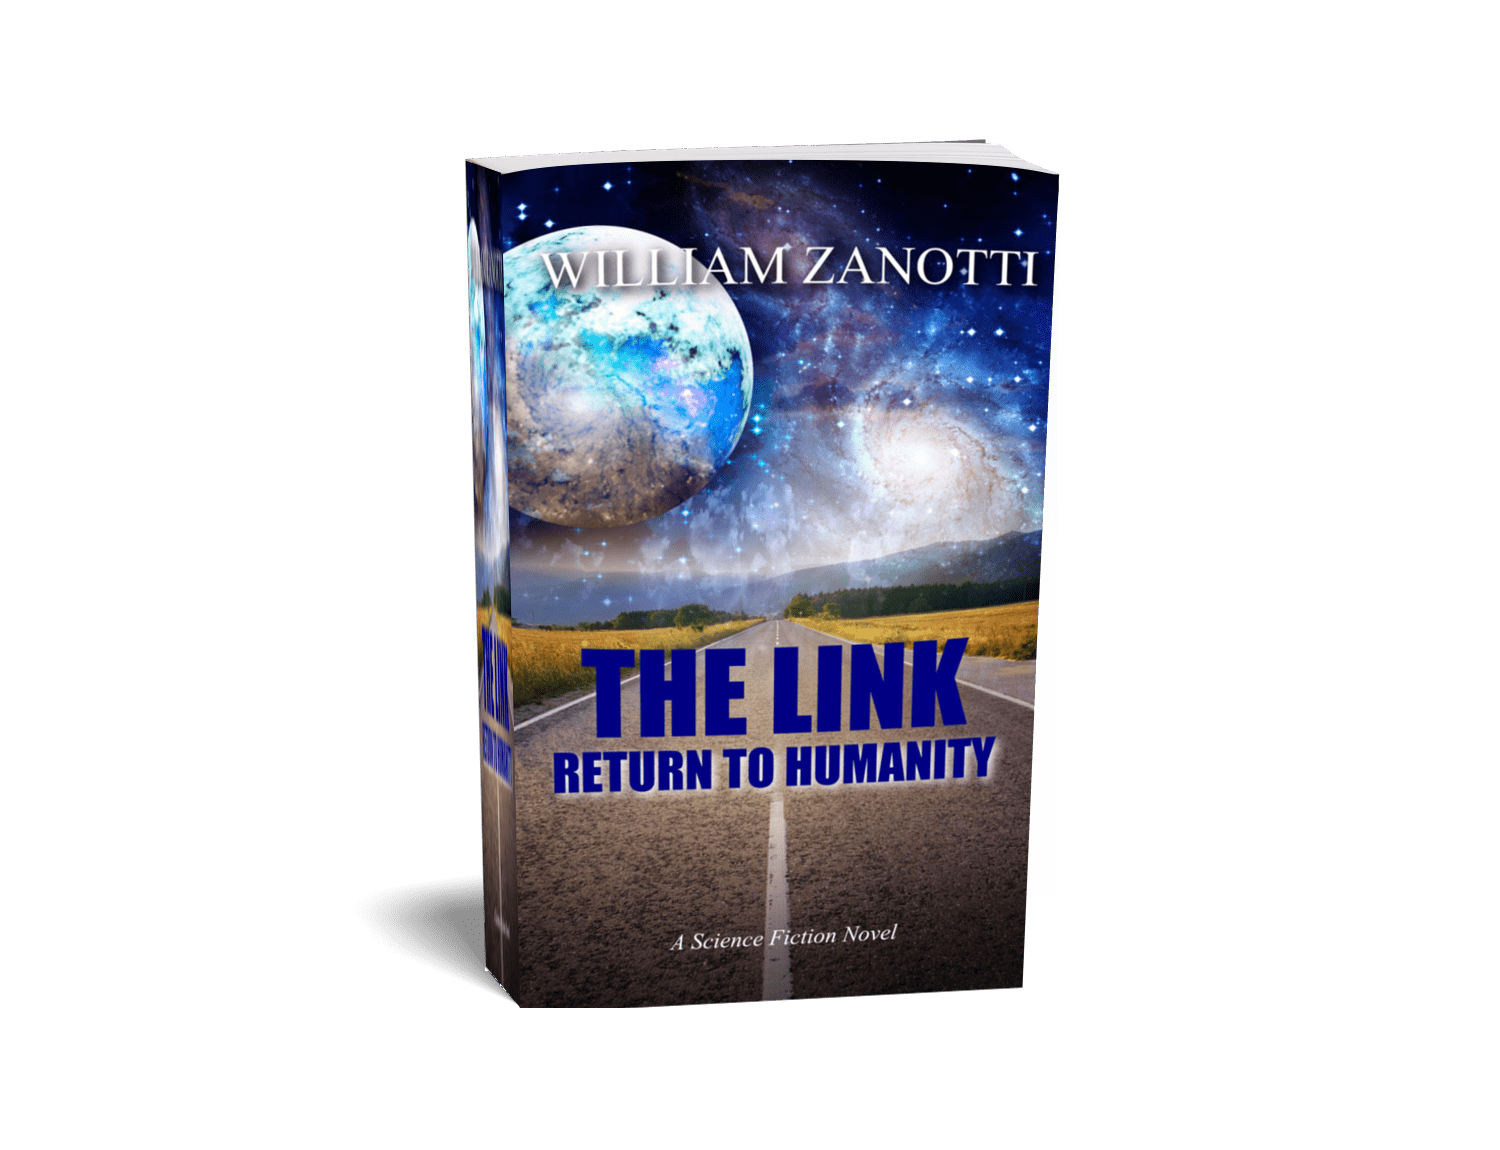 The Link: Return to Humanity, widely available.
